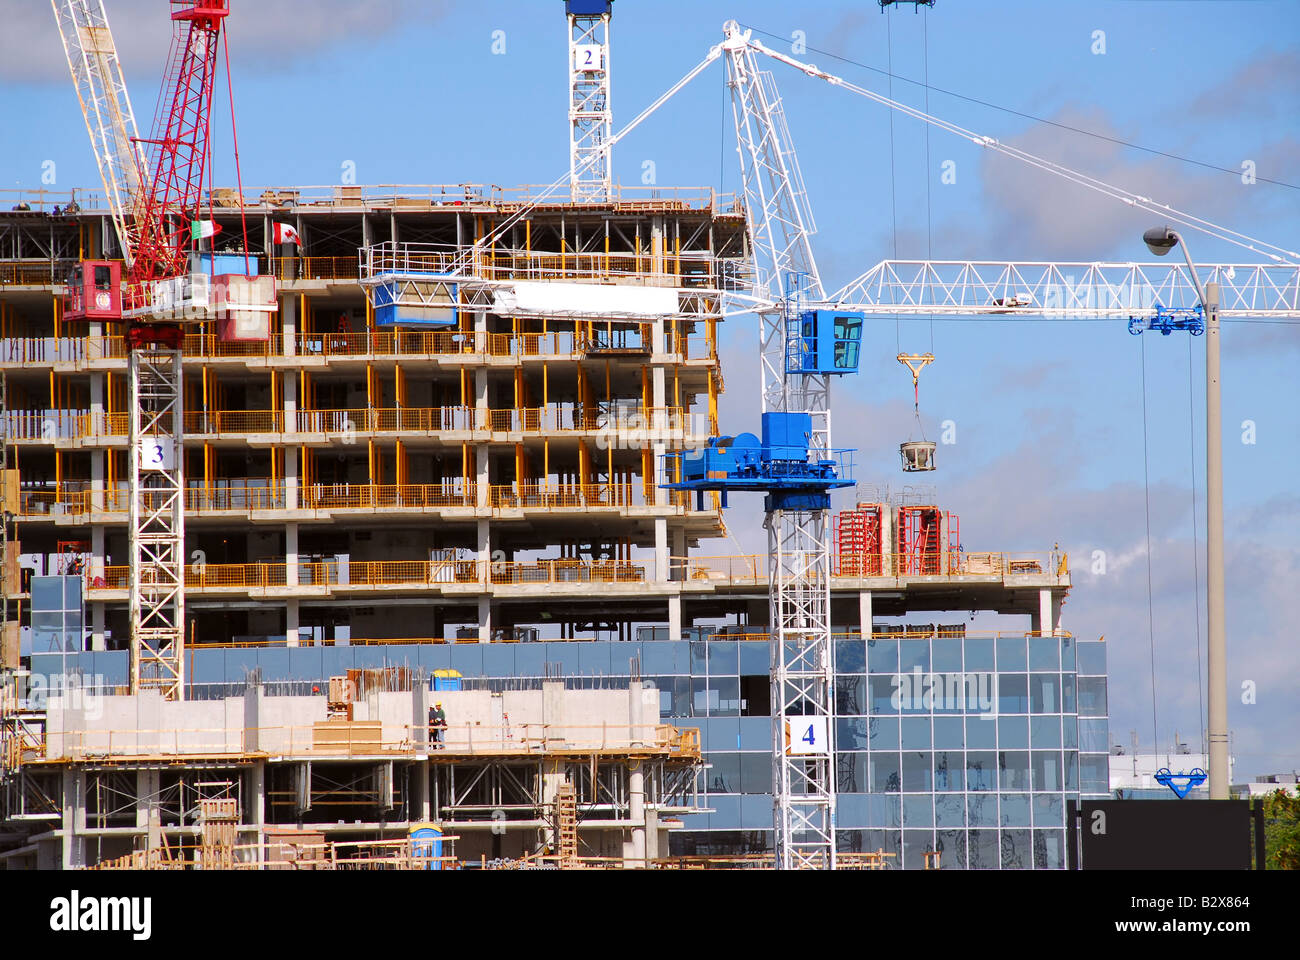 Construction of a tall modern building Stock Photo